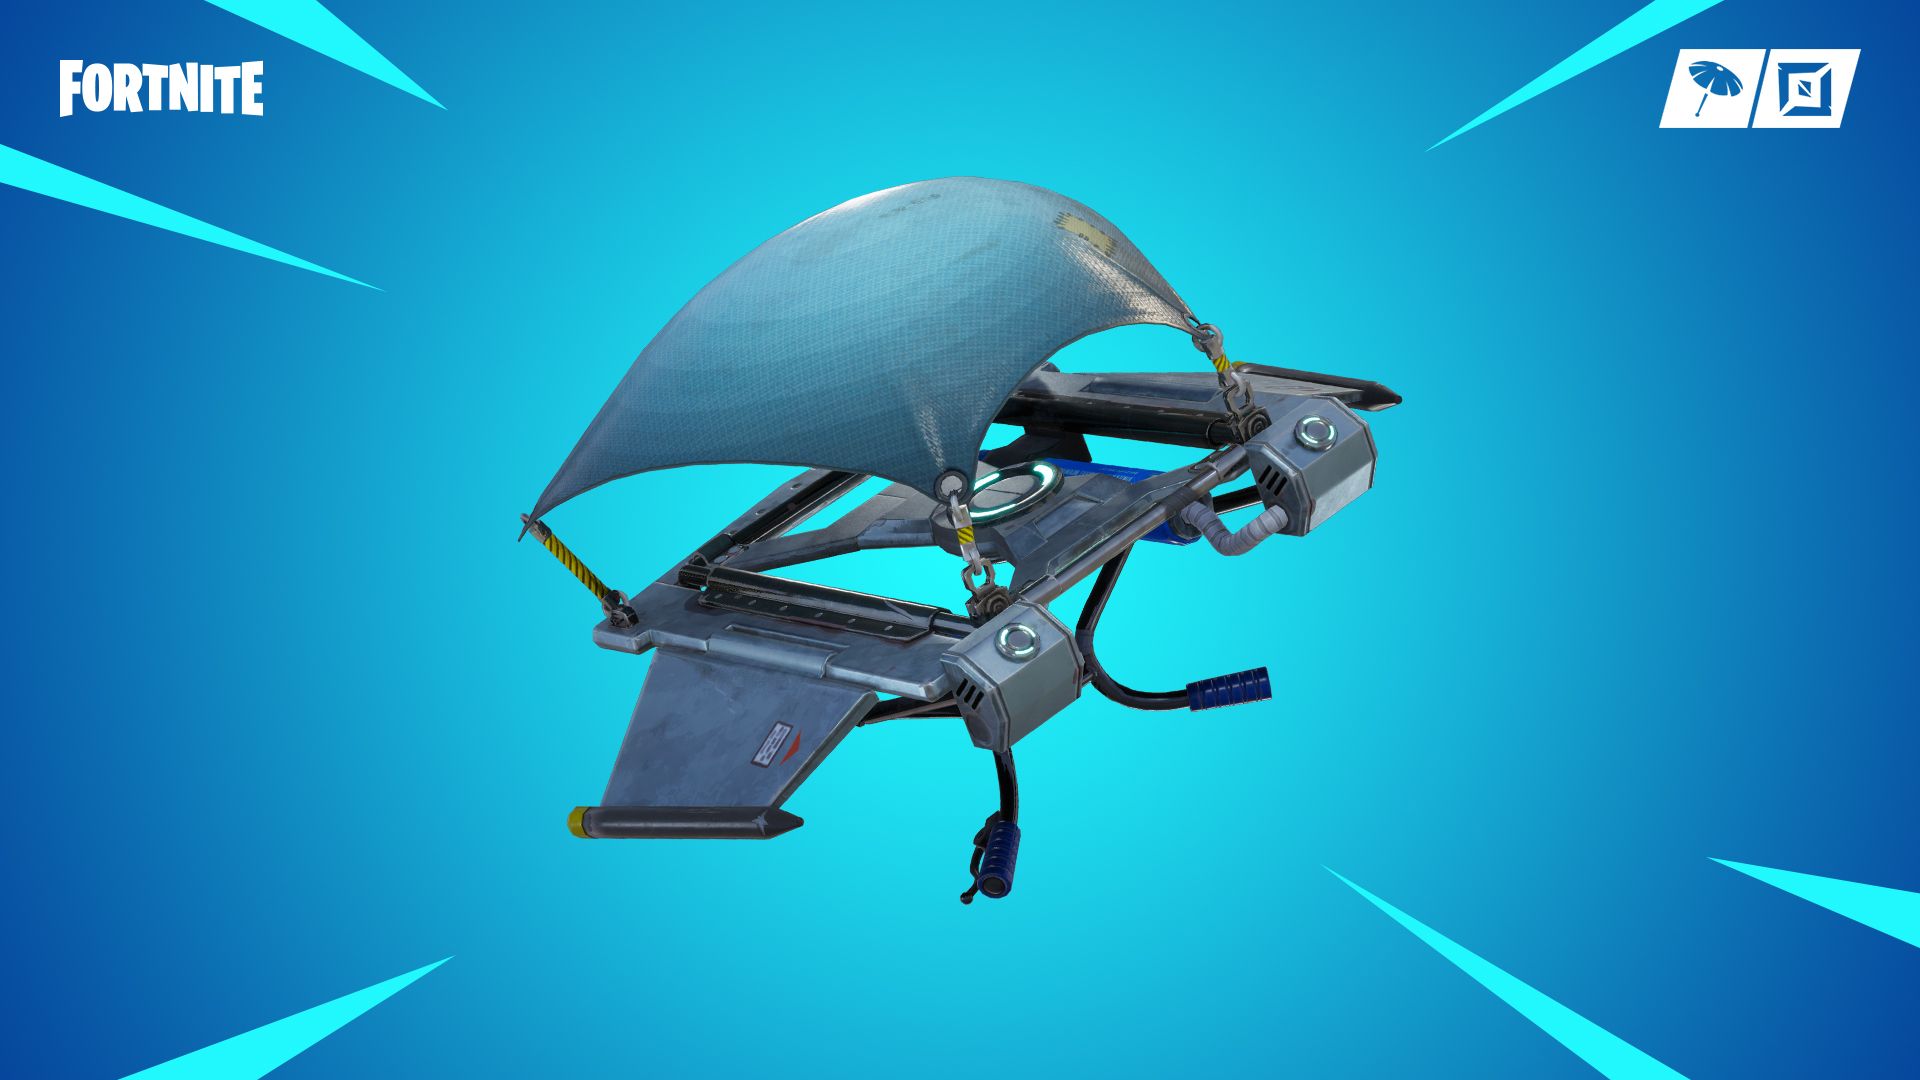 Fortnite 7 20 Update Adds Scoped Revolver Glider Redeploy Patch Notes